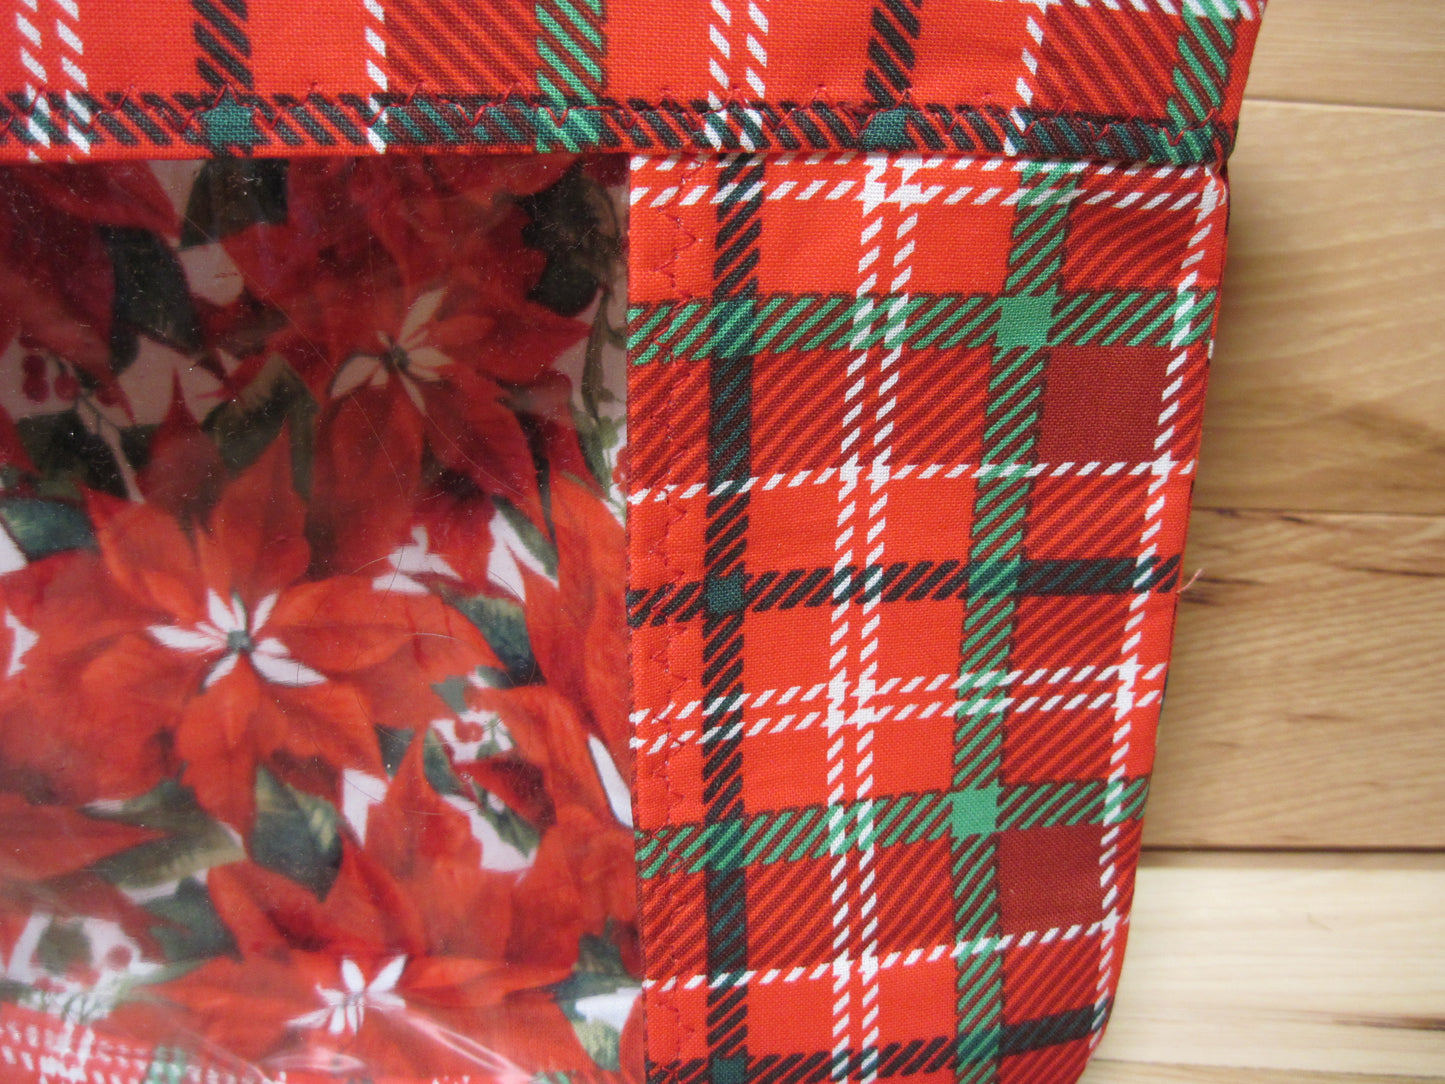 Medium Windows Plaid with Poinsettia project bags